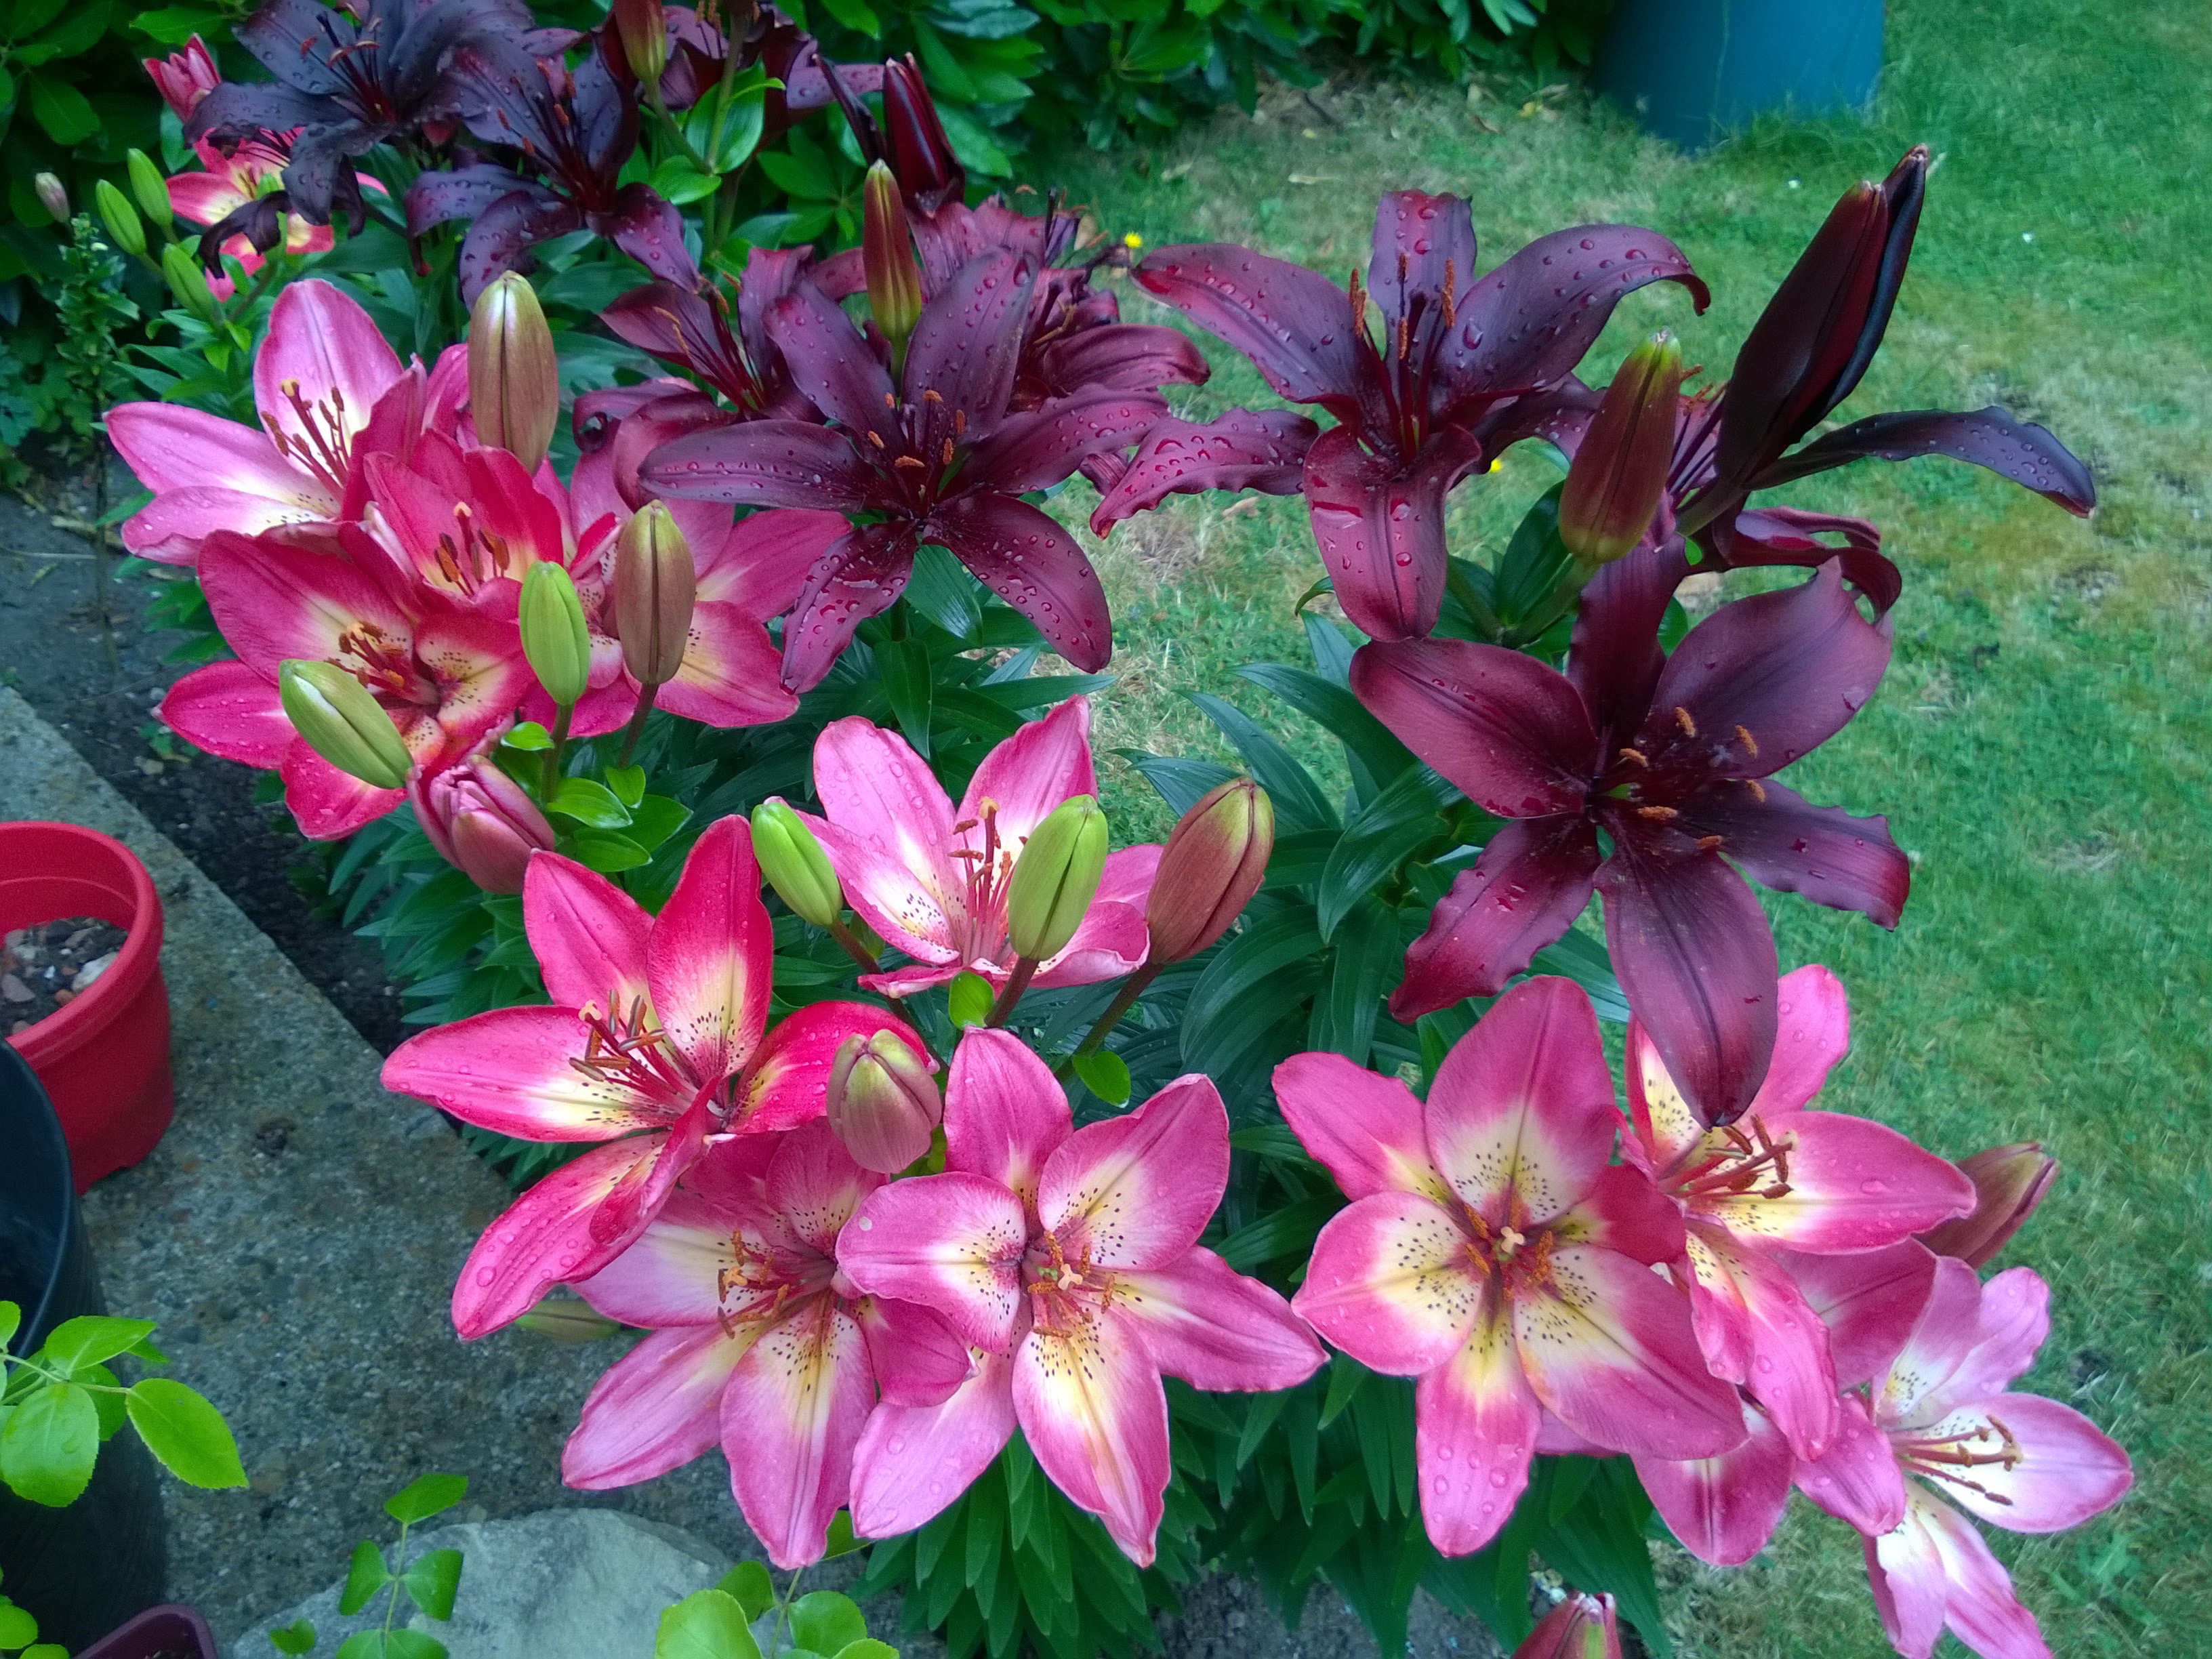 Mixed Lilies in Flower – The Garden at 13 Broom Acres